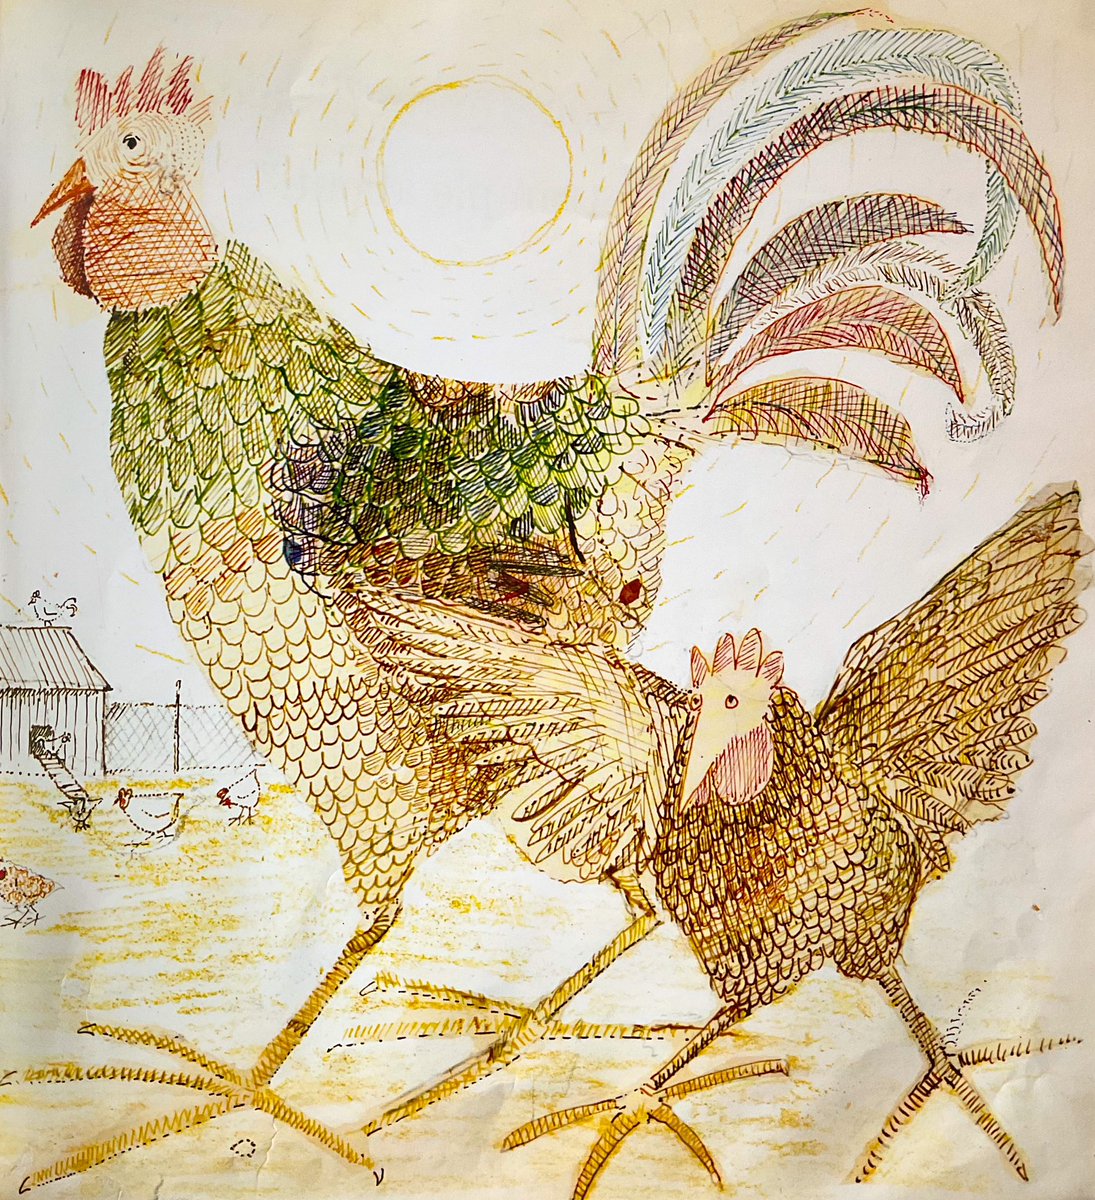 #BookIllustrationOfTheDay is by John Burningham for “Mr Gunmpy’s Outing” (1970). I always loved these fabulous chickens, all the scratchy ink line, and delicate detail, the radiating sun. So much texture and quirky character - a revelation & a picture book revolution!